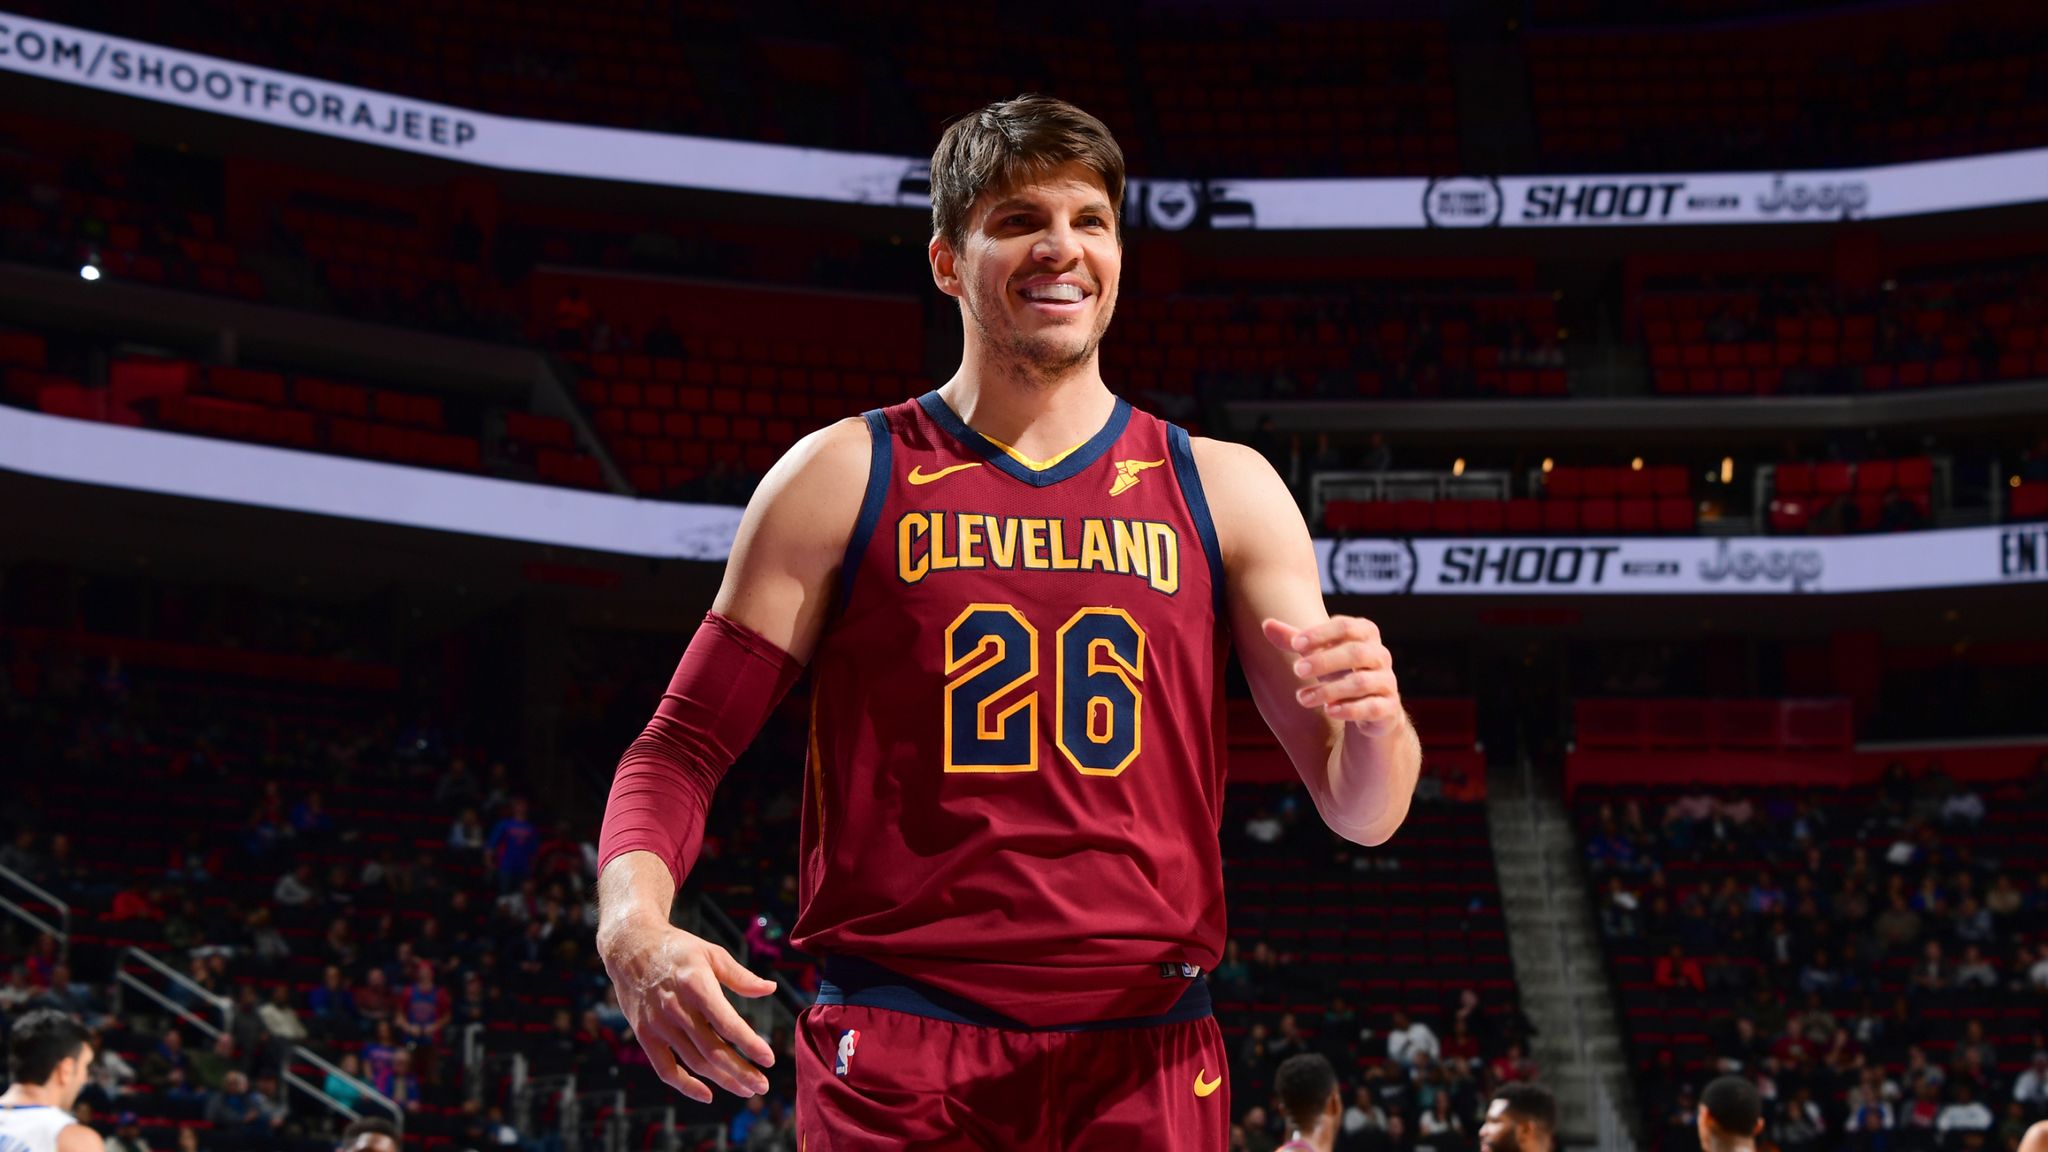 Reportedly promised by Cavaliers he'd be traded or bought out last  offseason, Kyle Korver pleased with trade to Jazz now - NBC Sports